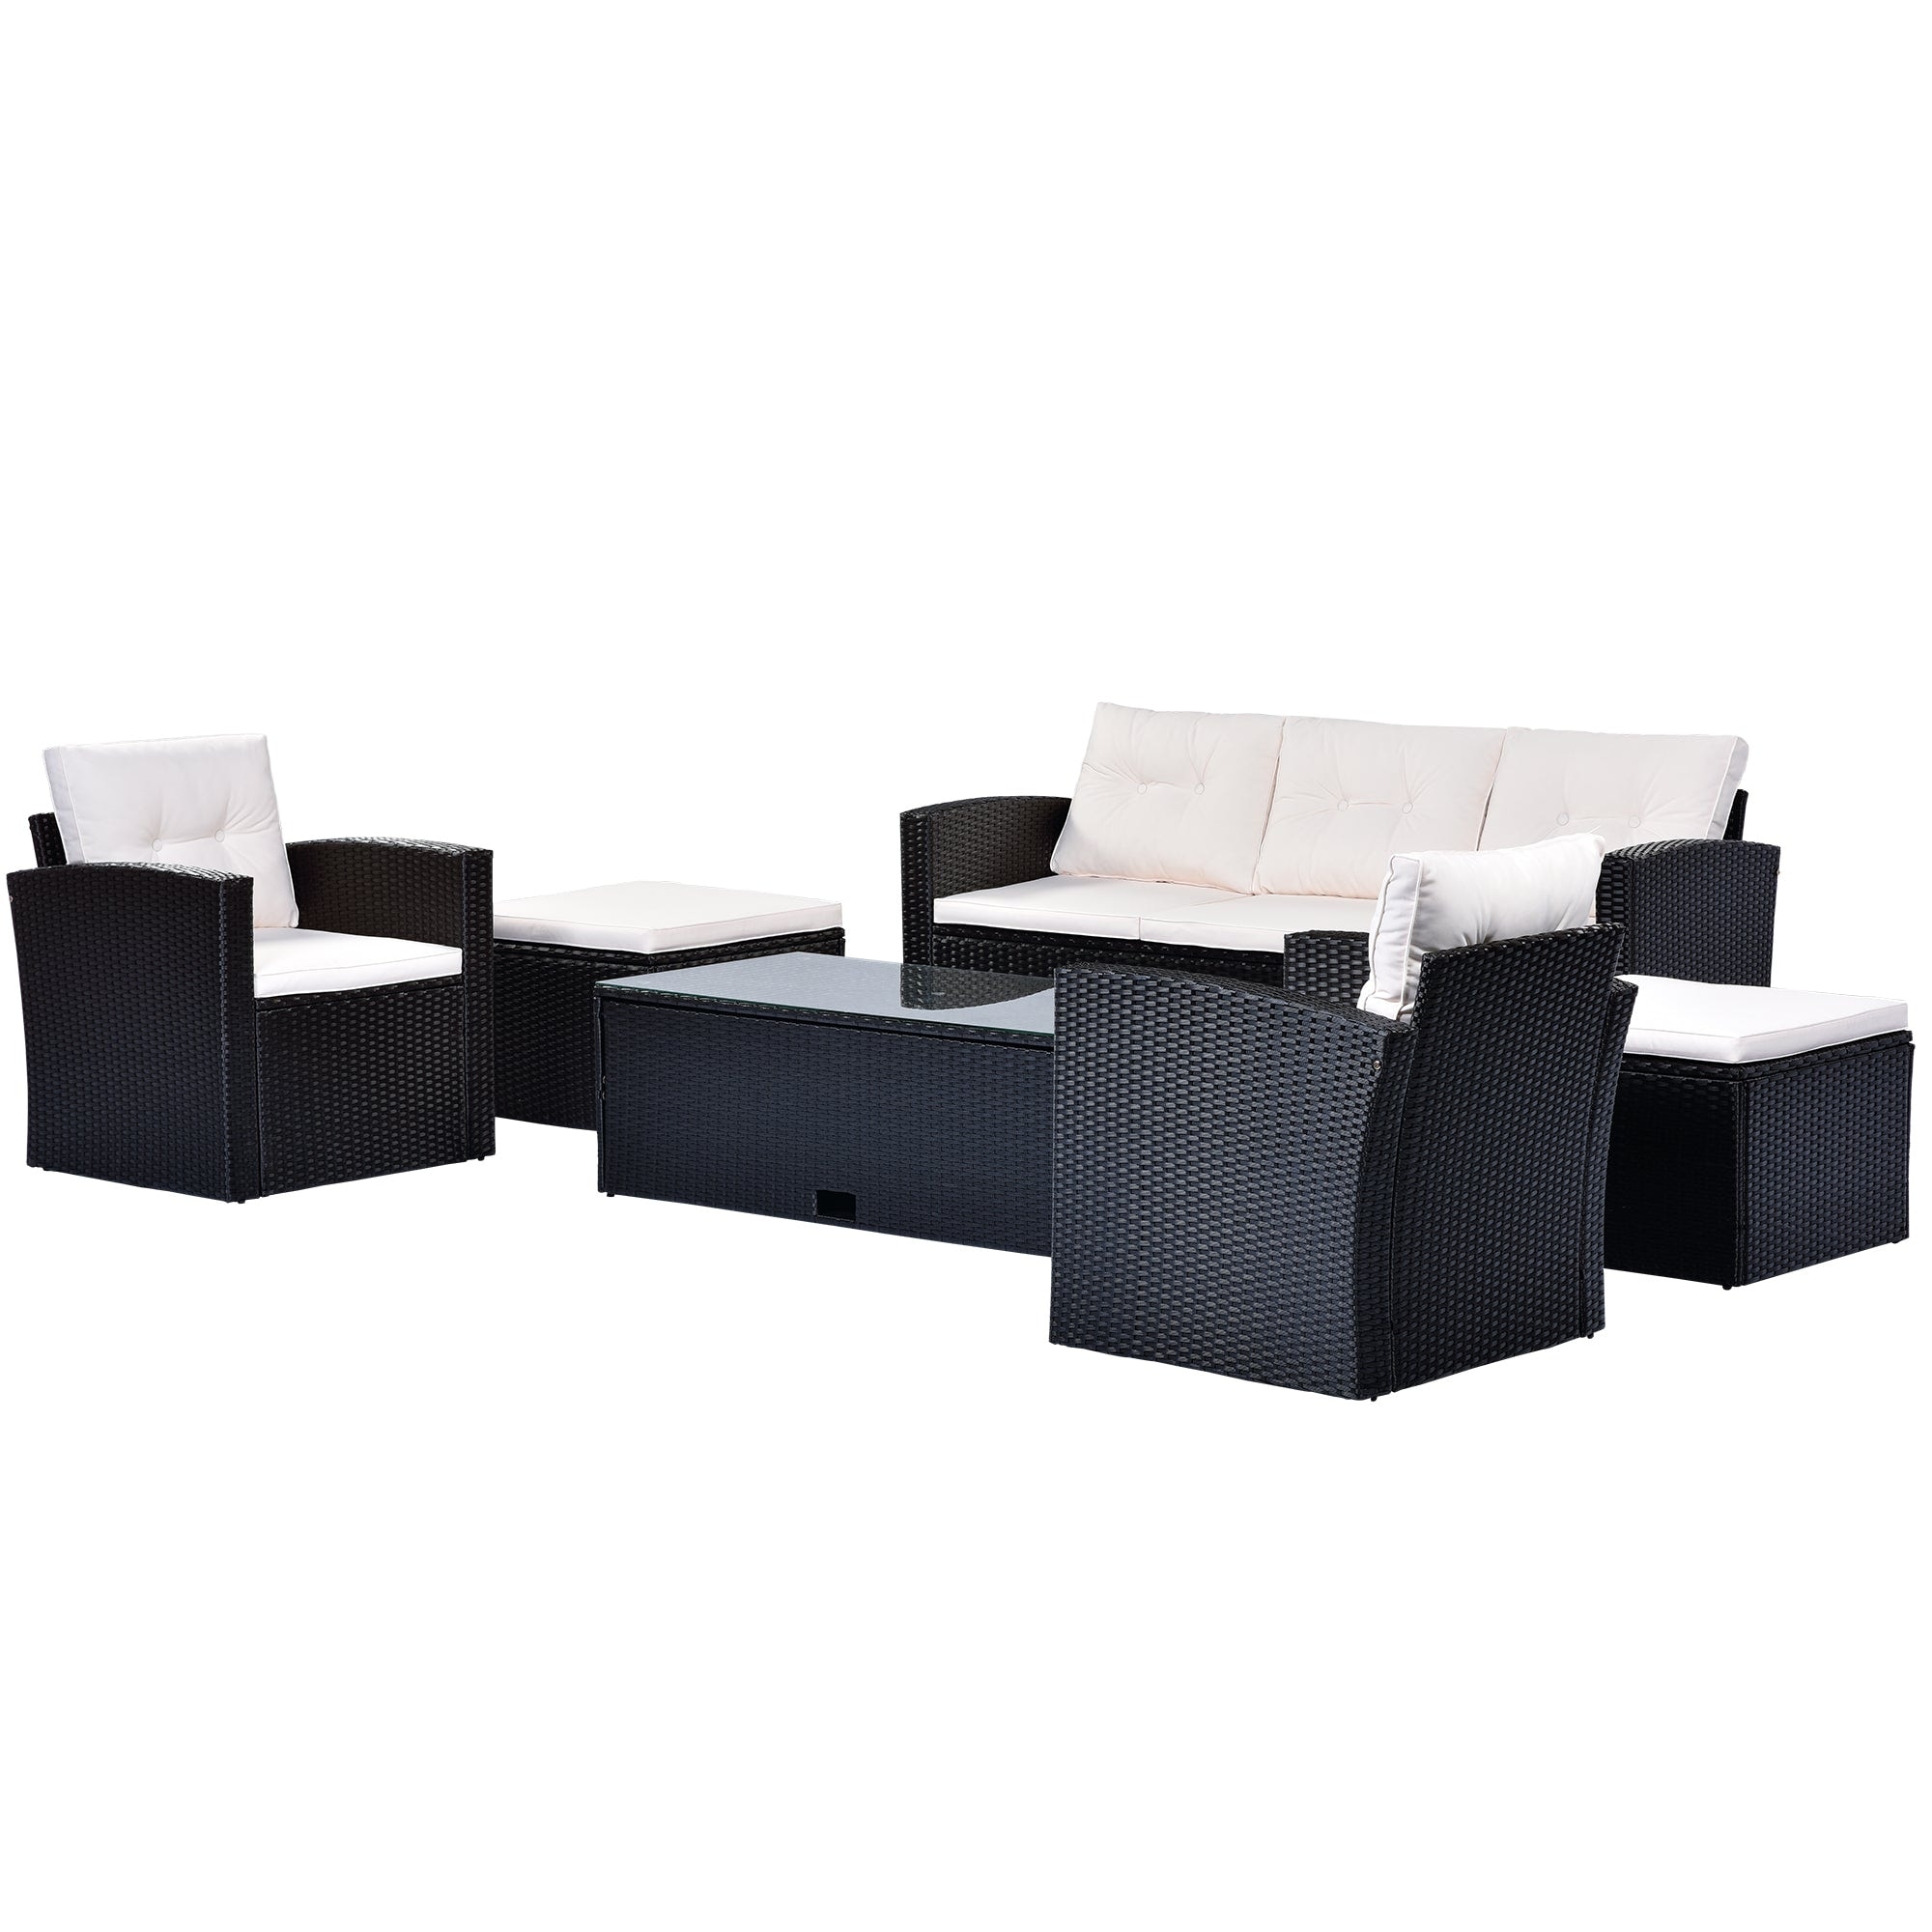 6-pieces Outdoor Wicker Reversible Patio Sectional Set With Storage And Cushions